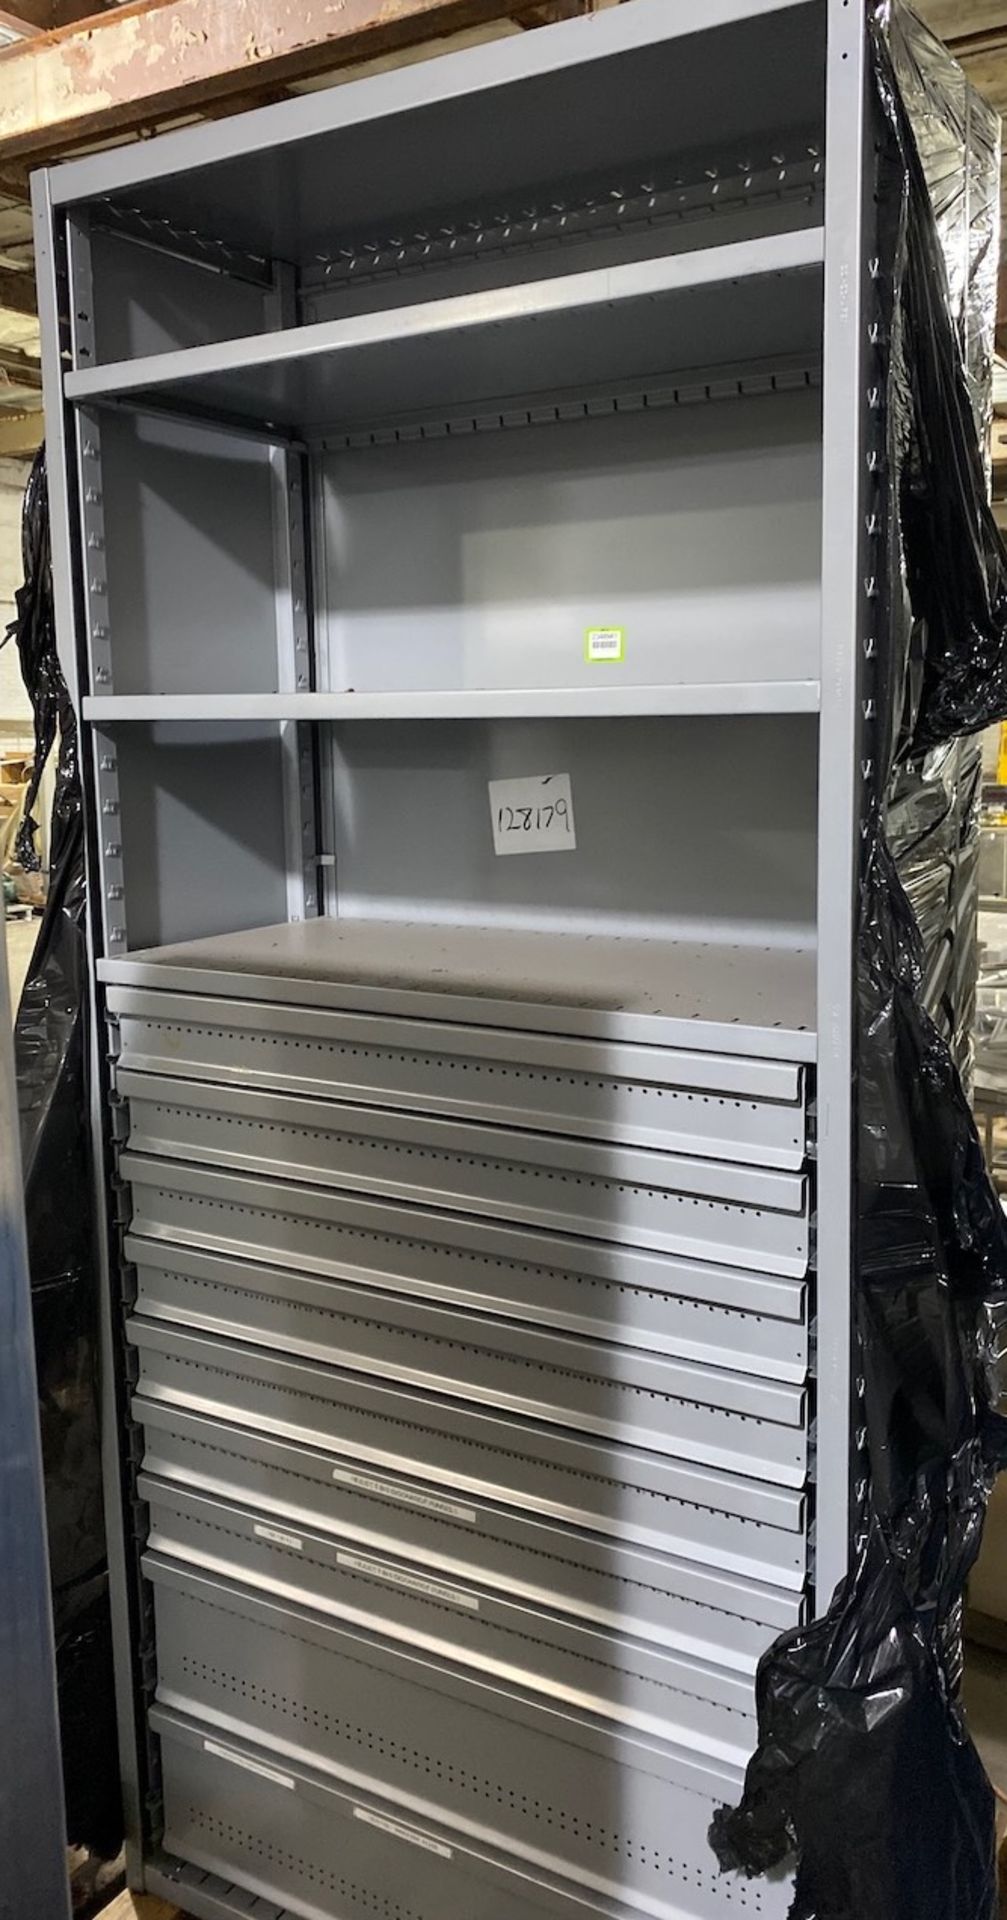 Steel Cabinet with drawers